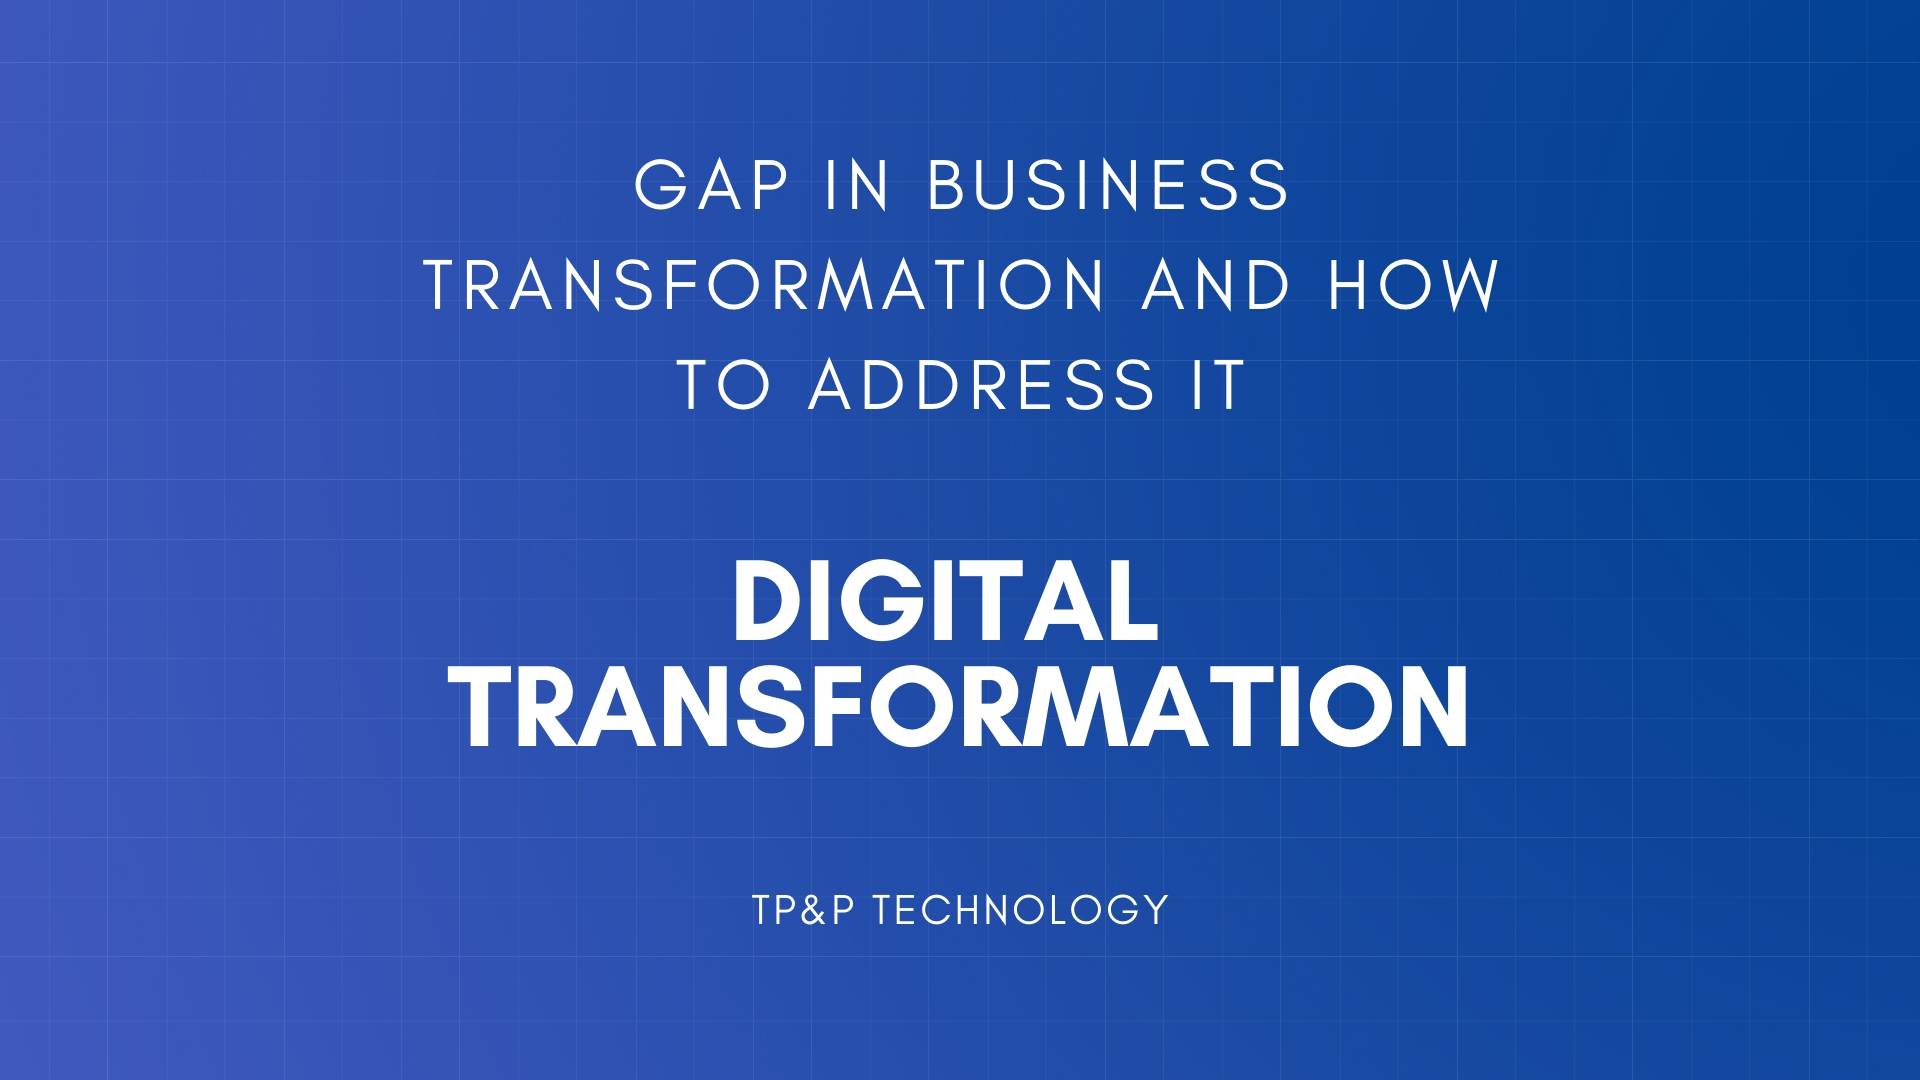 DIGITAL TRANSFORMATION: GAPS IN BUSINESS TRANSFORMATION AND HOW TO FILL IT